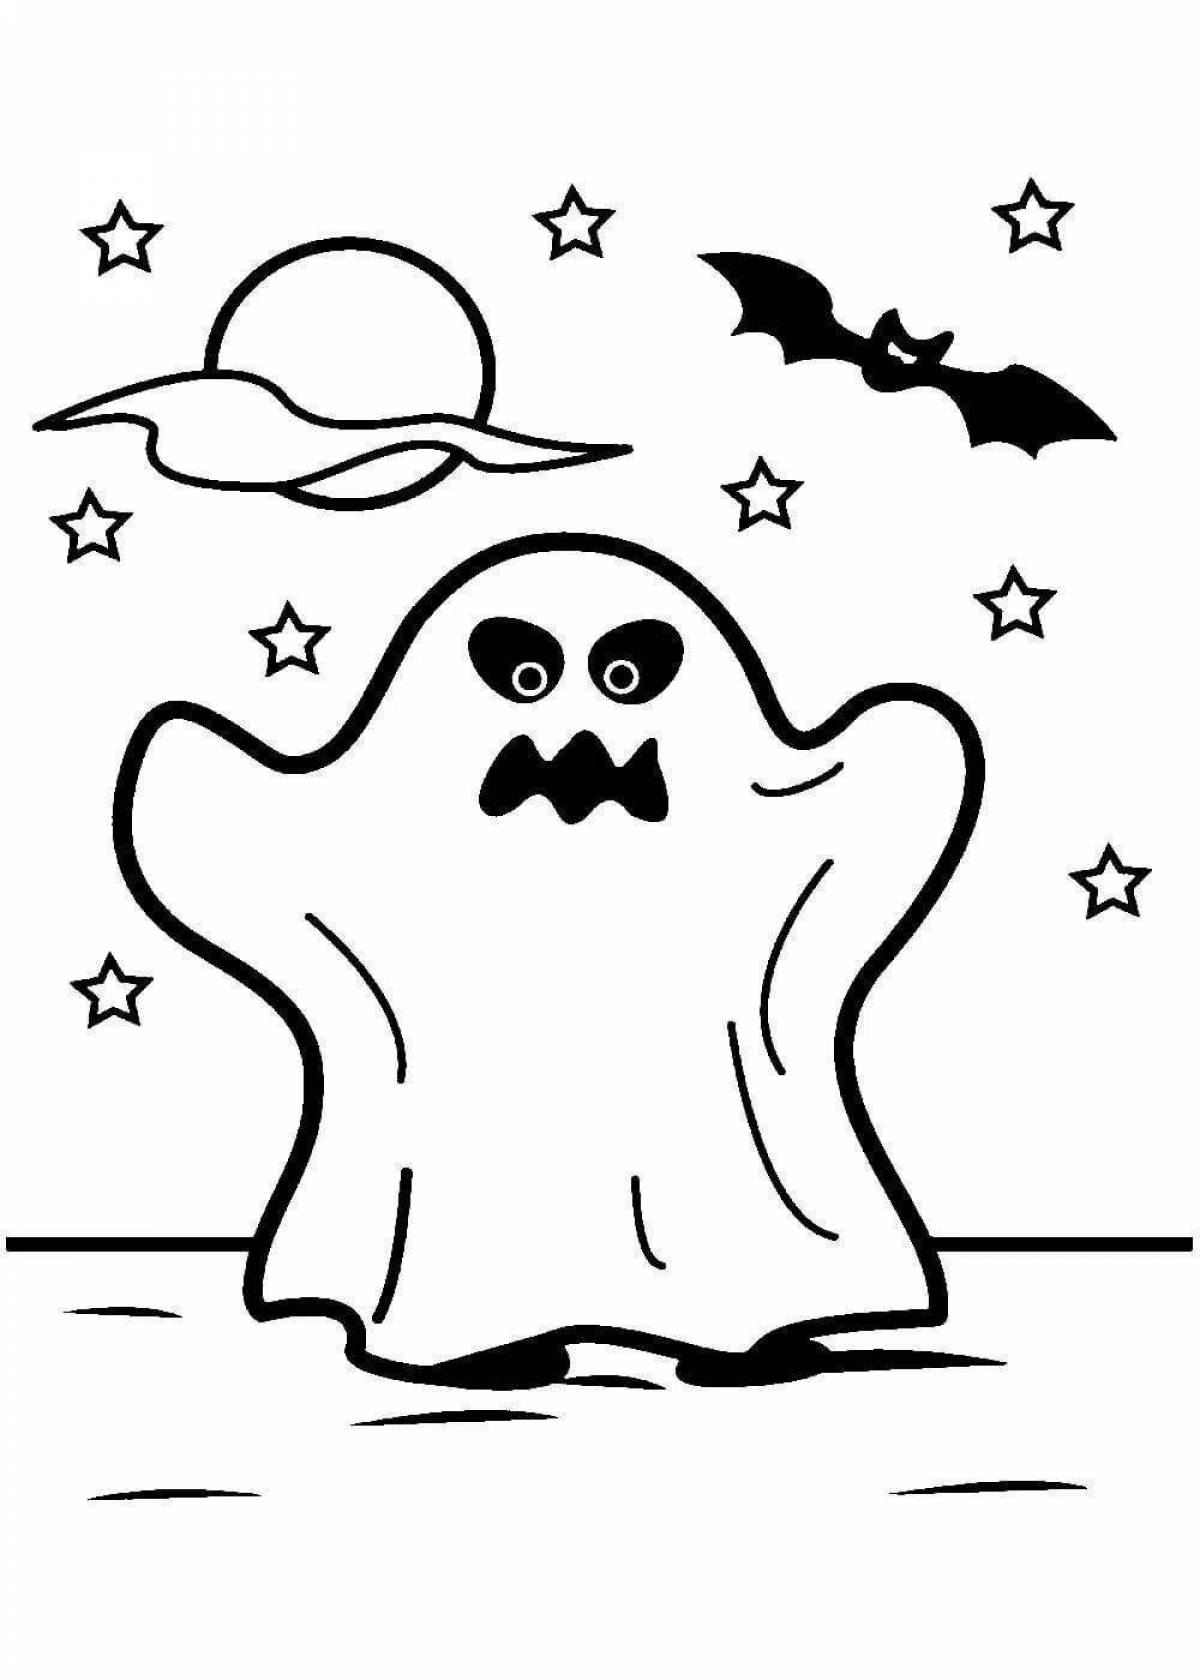 Whimsical ghost coloring for kids